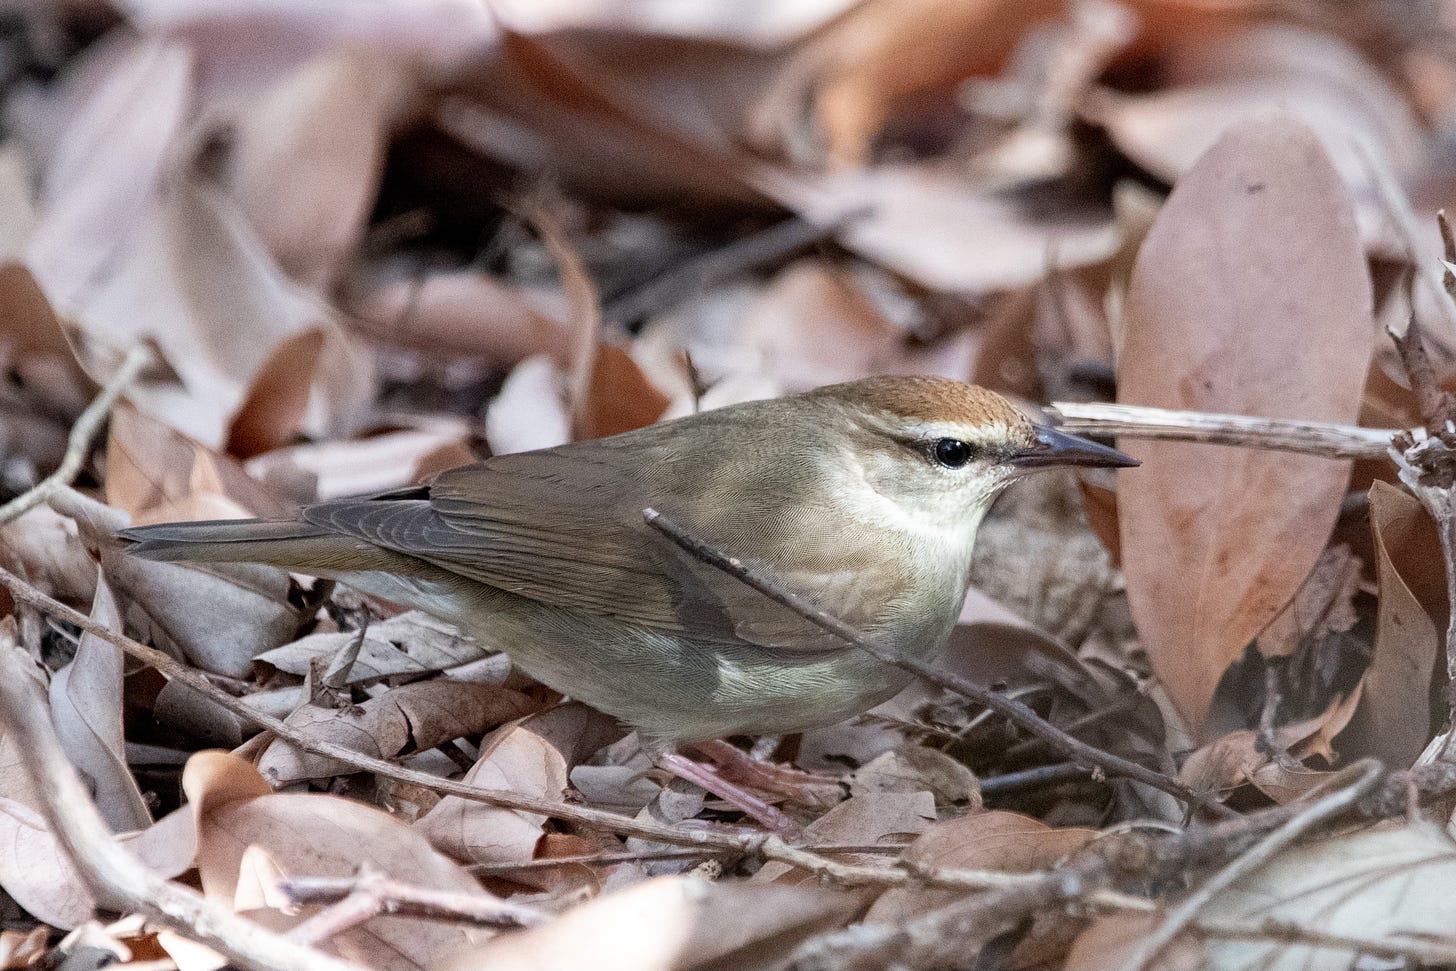 A brown warbler with a rufous cap and a dark brown eyeline, looking meditative during a momentary pause between furrowings through leaf debris for bugs